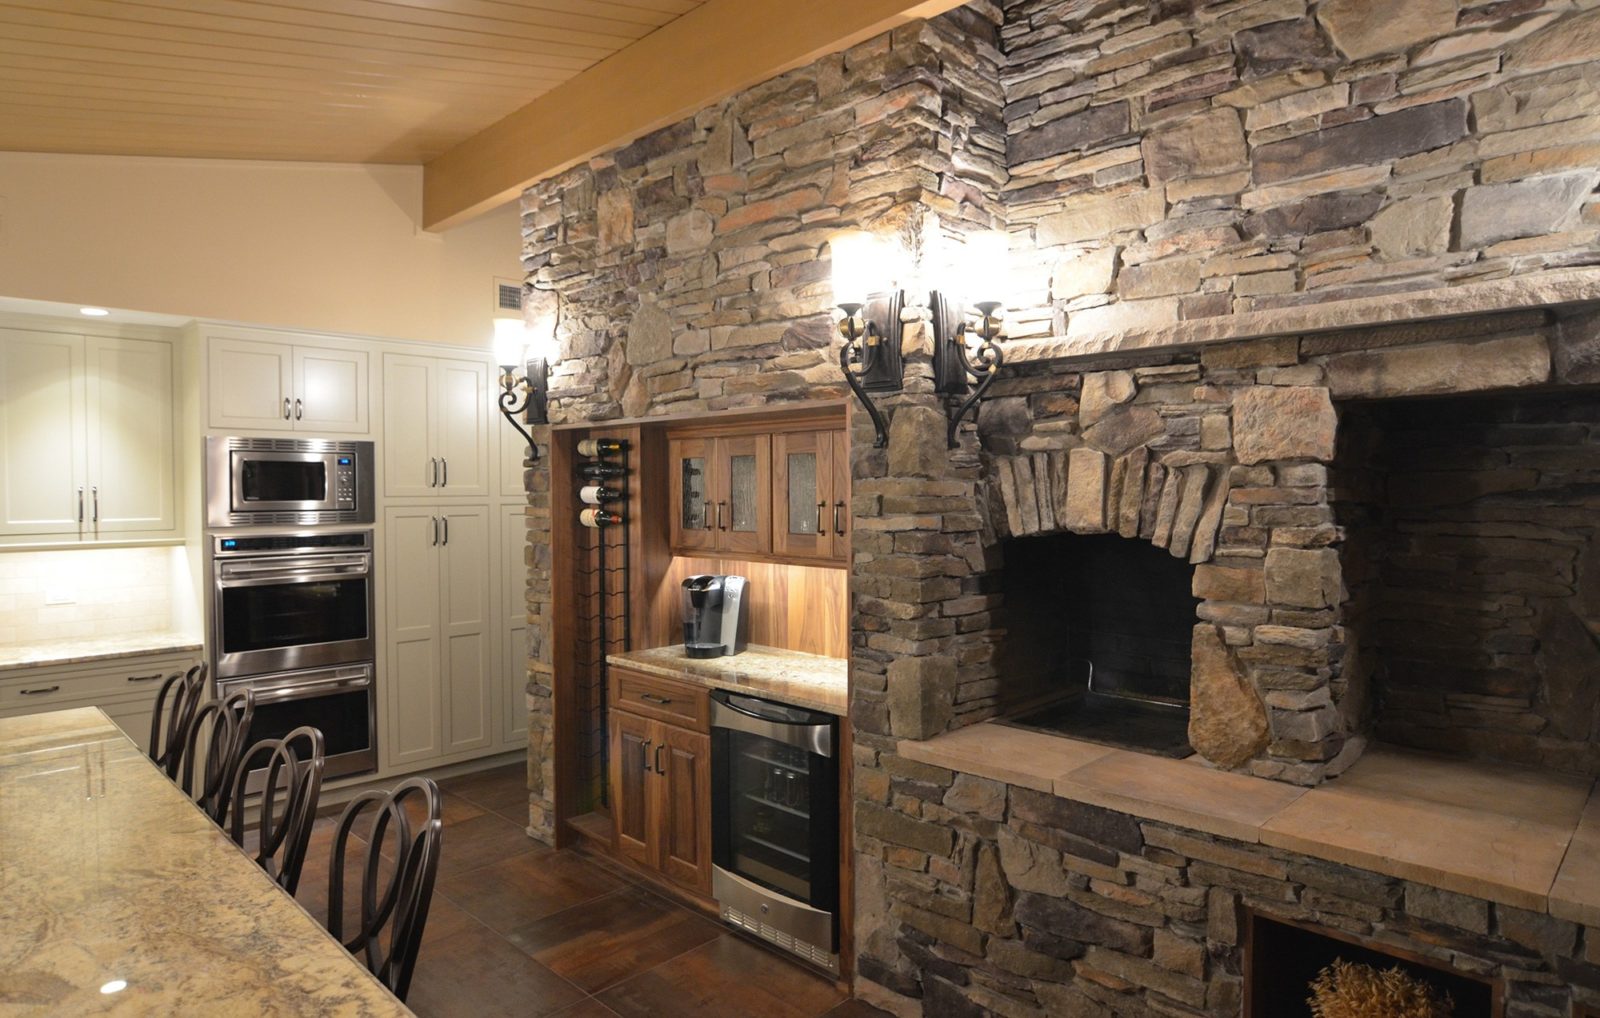 Kitchen with cabinets, drawers, appliances, kitchen table and chairs, stonework wall with stone oven